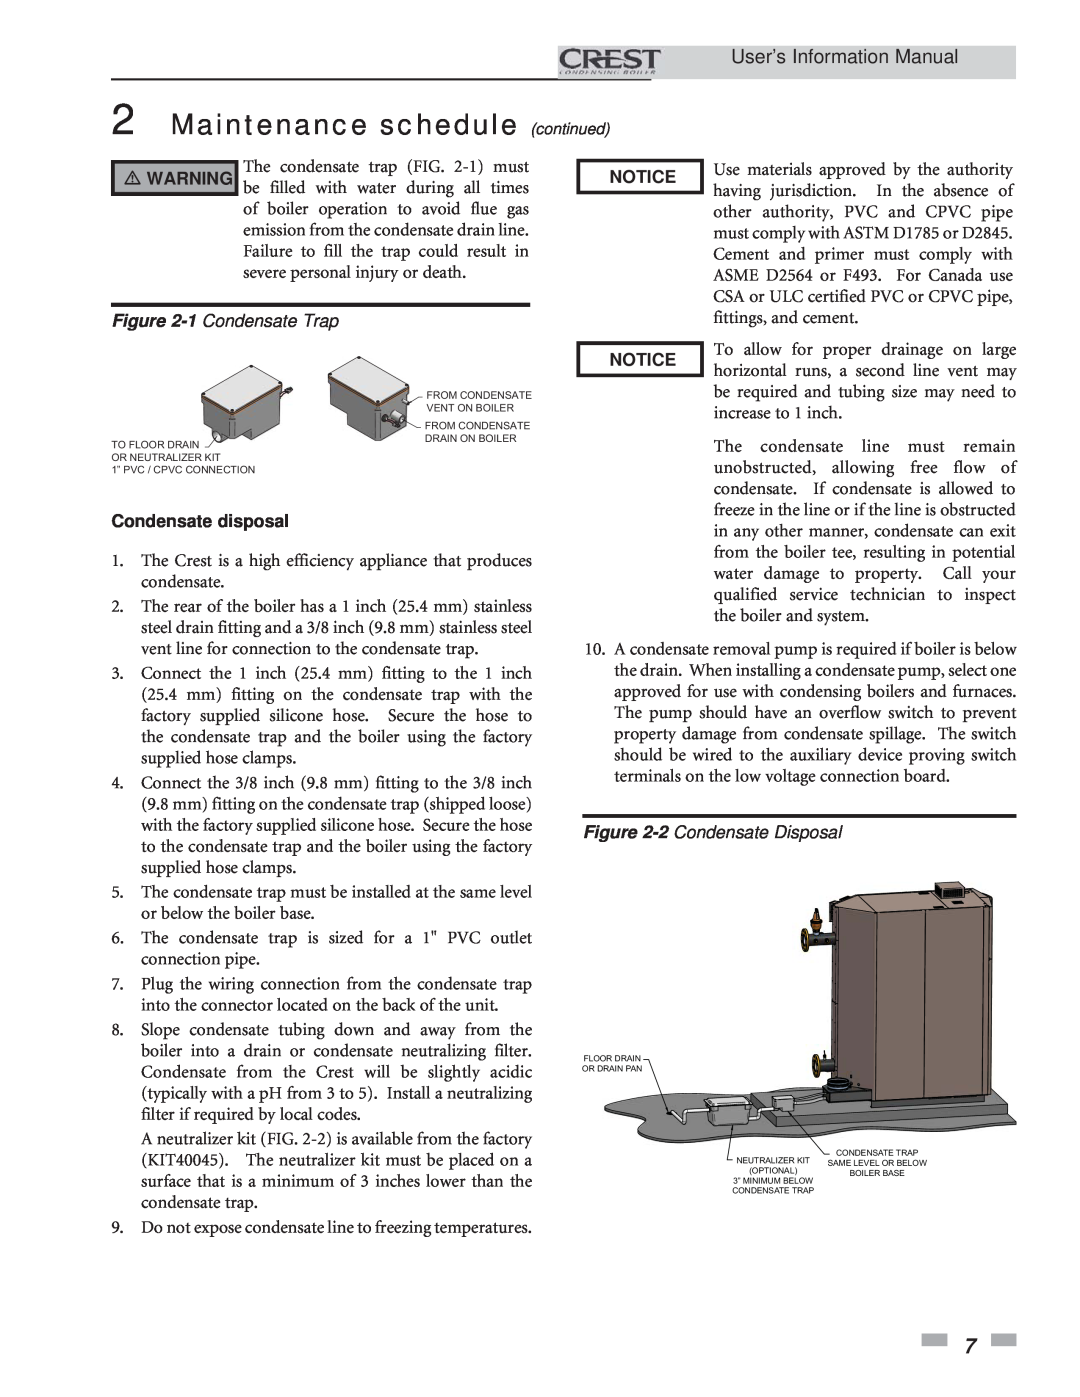 Lochinvar 1.5 manual Maintenance schedule continued, User’s Information Manual, 1 Condensate Trap, Condensate disposal 